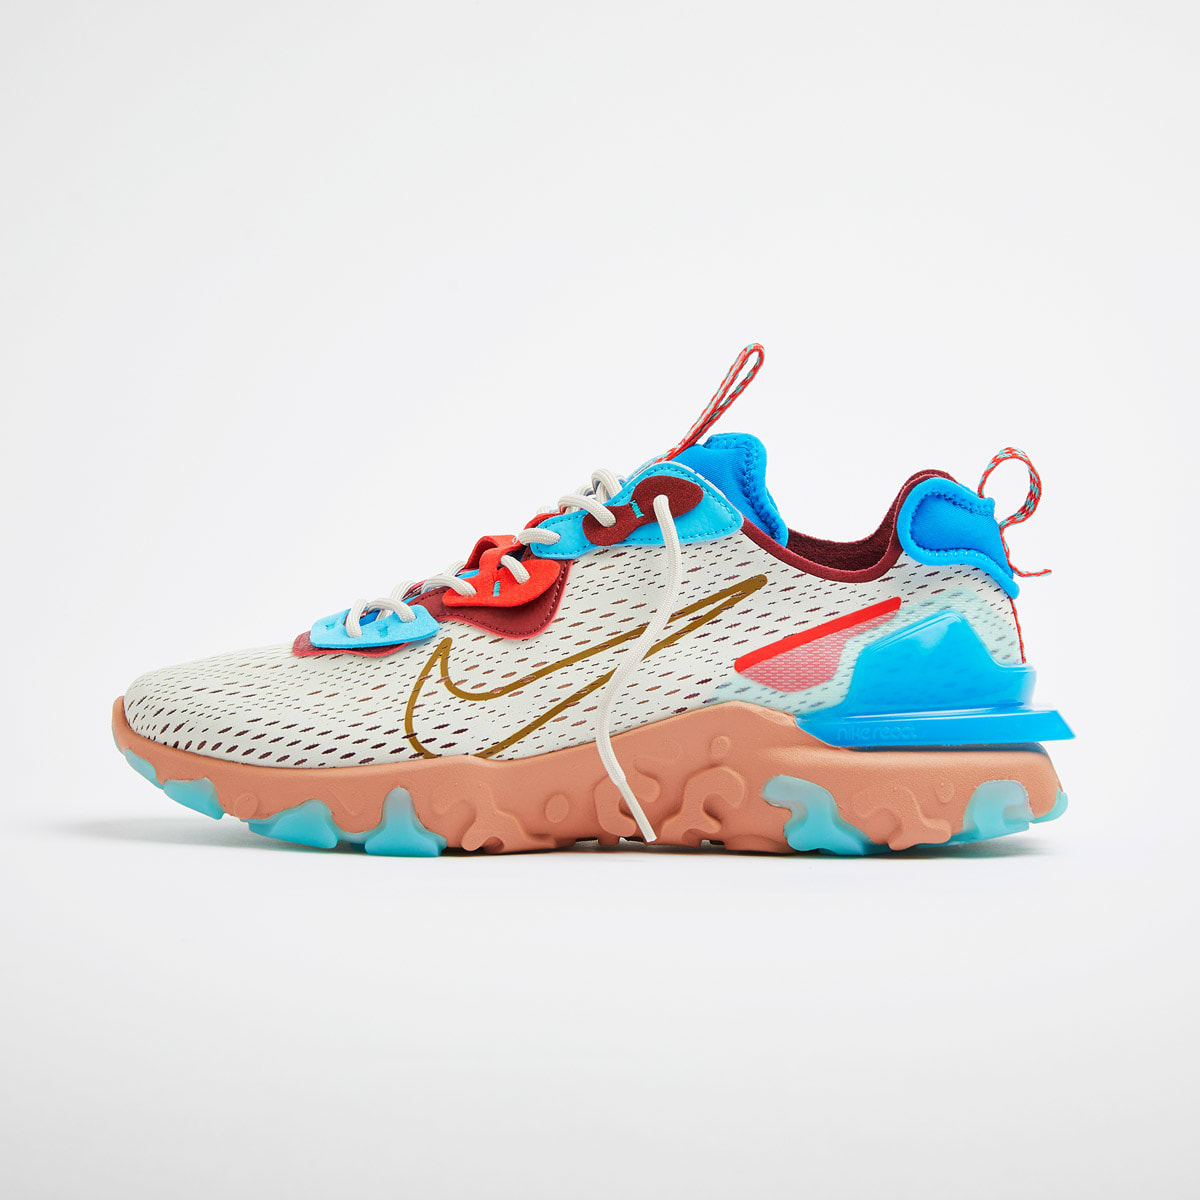 Nike React Vision (Light Bone, Blue & Red) | END. Launches